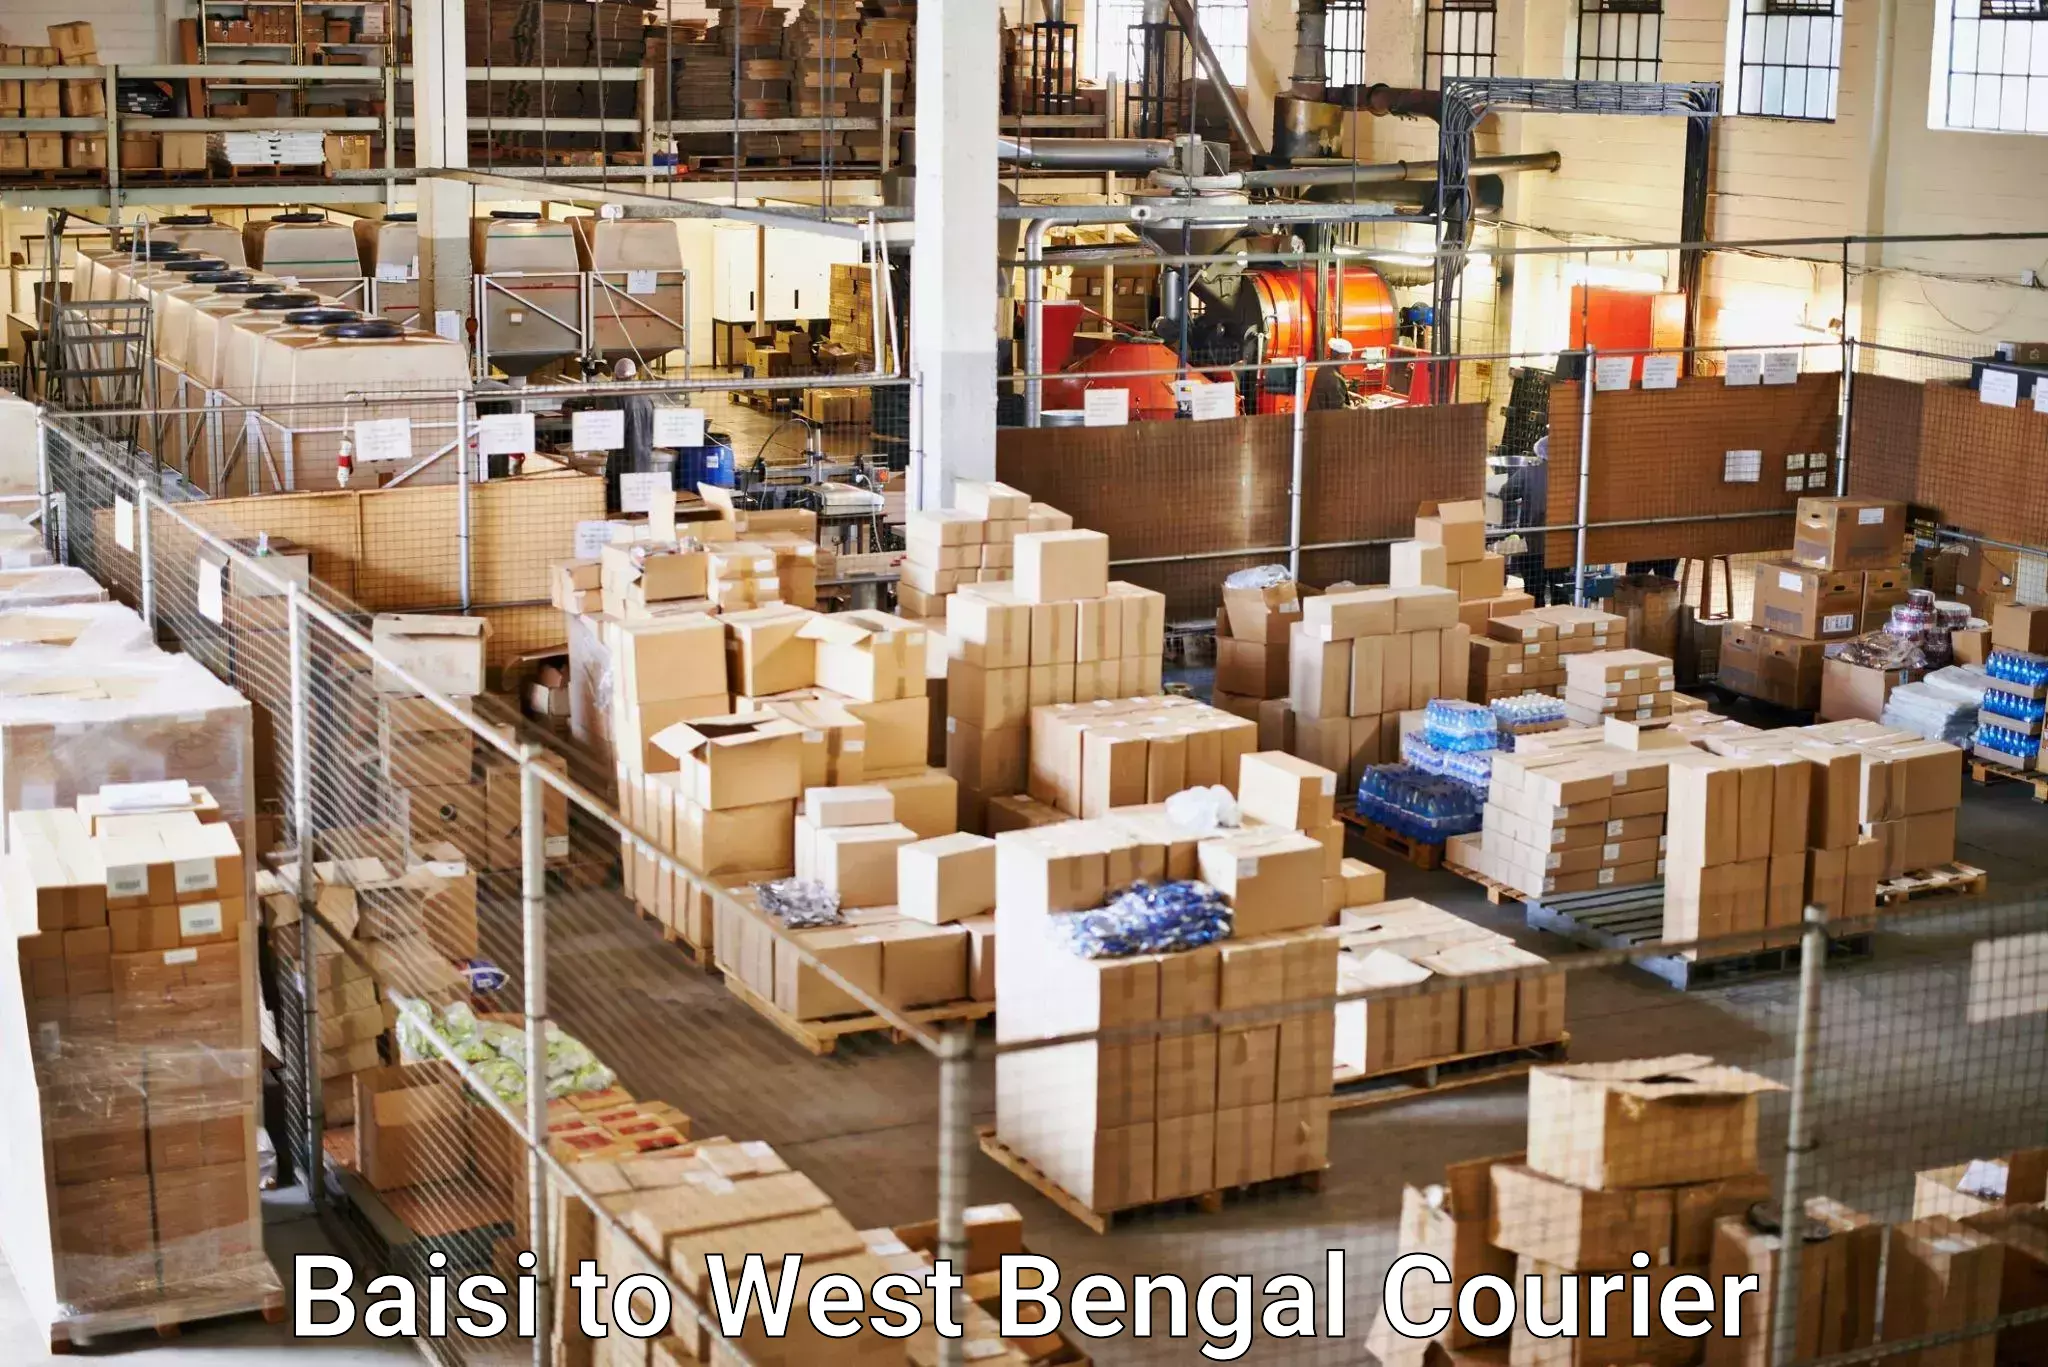 International courier networks Baisi to Barasat